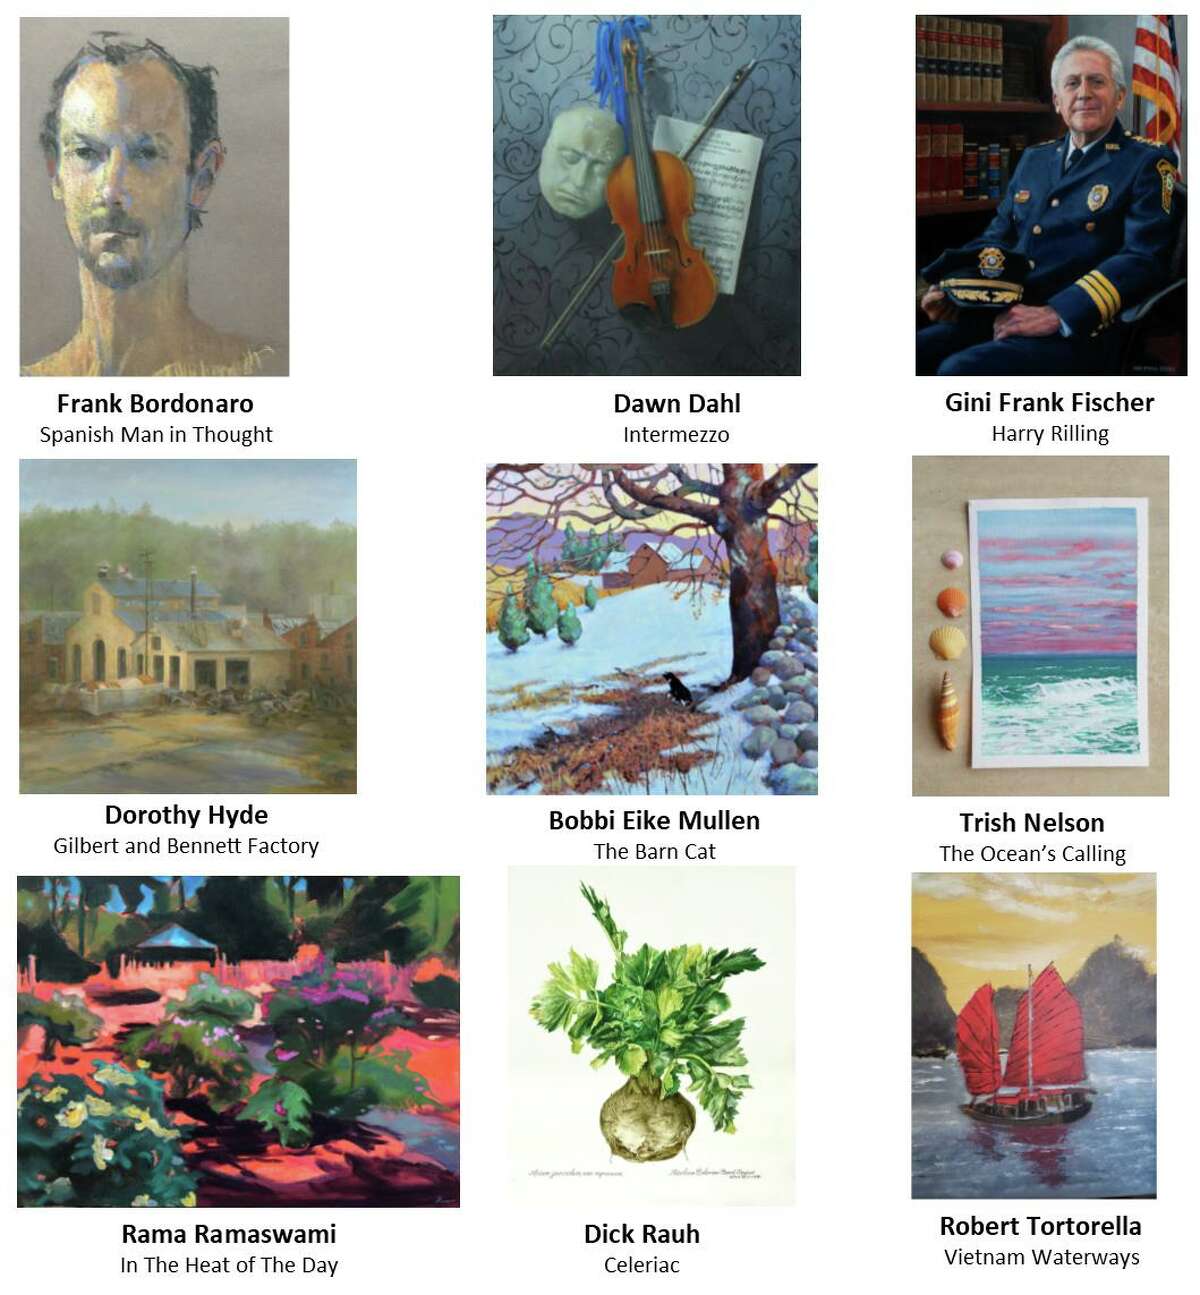 Wilton Library’s “Winter Interlude,” an exhibition featuring nine area artists, opens Jan. 10, with a reception that is free and open to the public. The show features more than 70 works highlighting diverse subject matter, styles and media choices. Portions of the proceeds benefit the library.